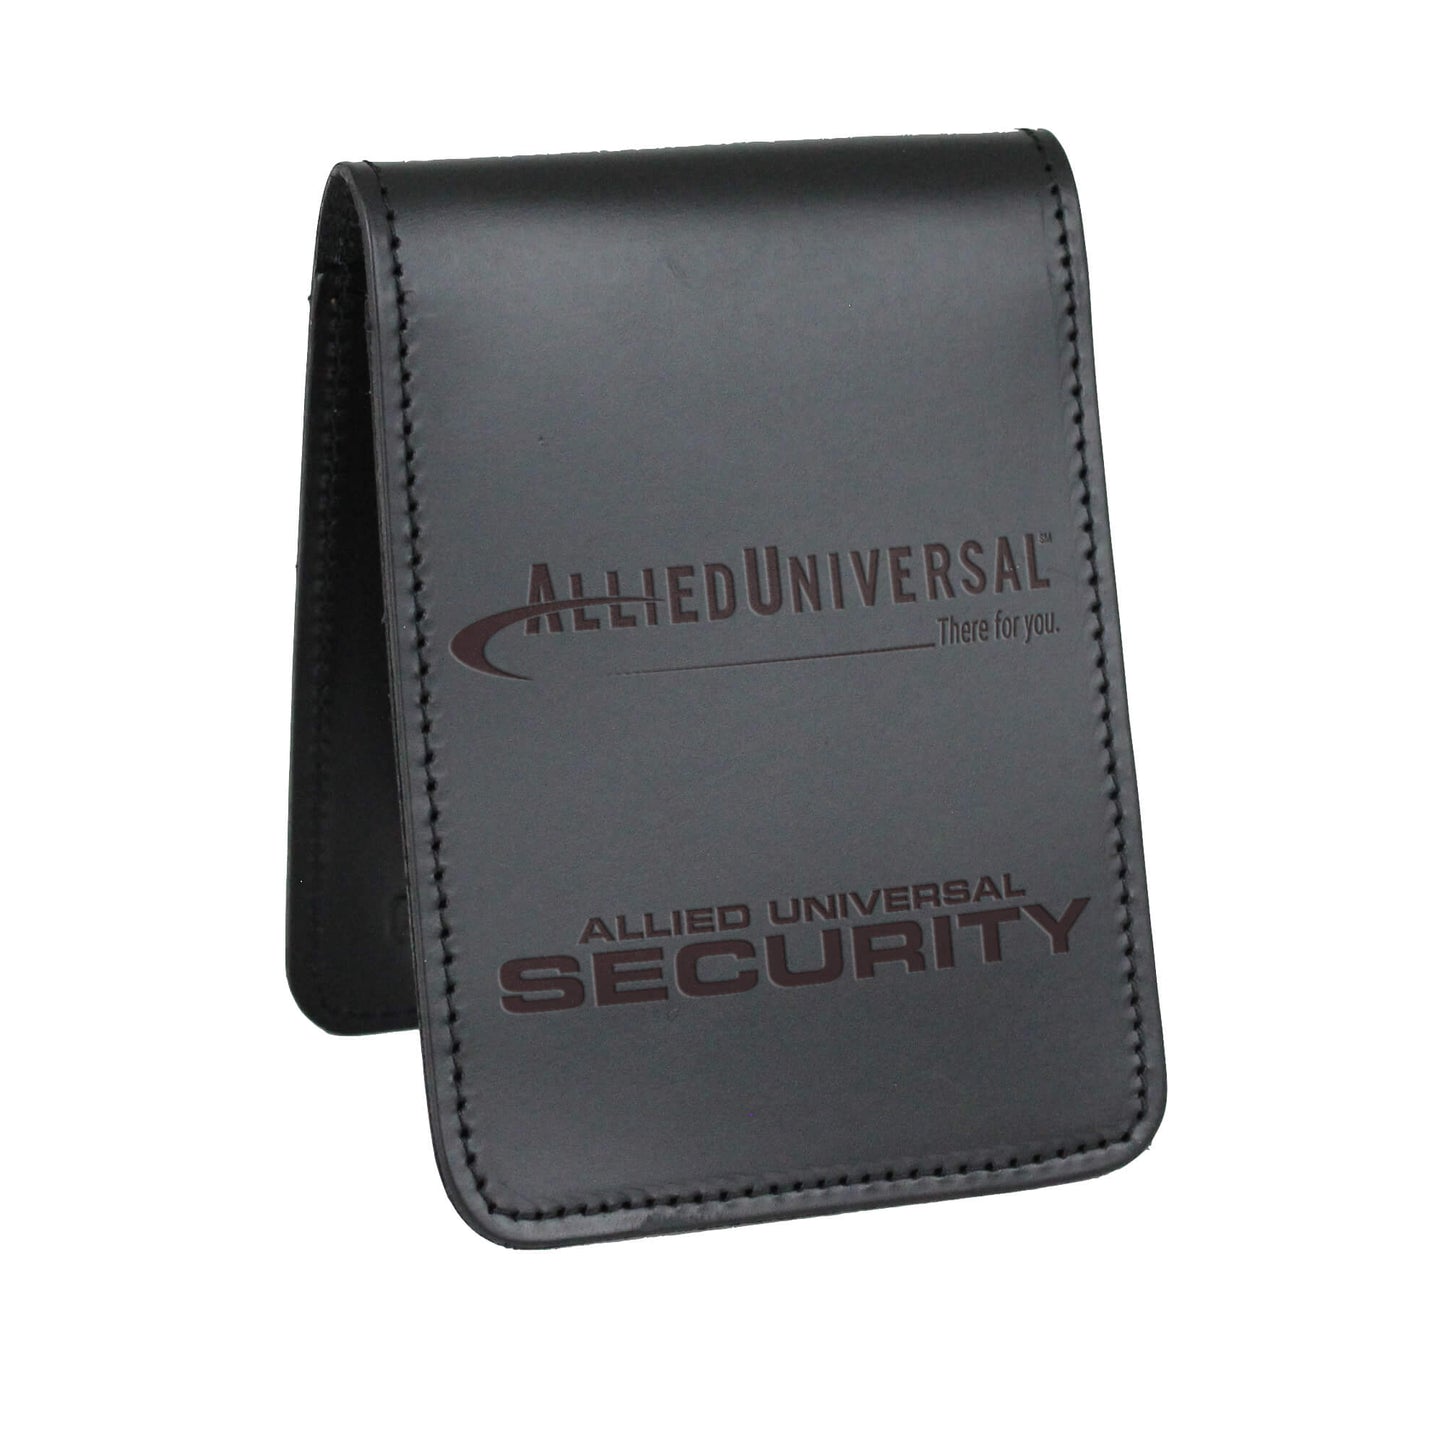 Allied Universal Security Notebook Cover